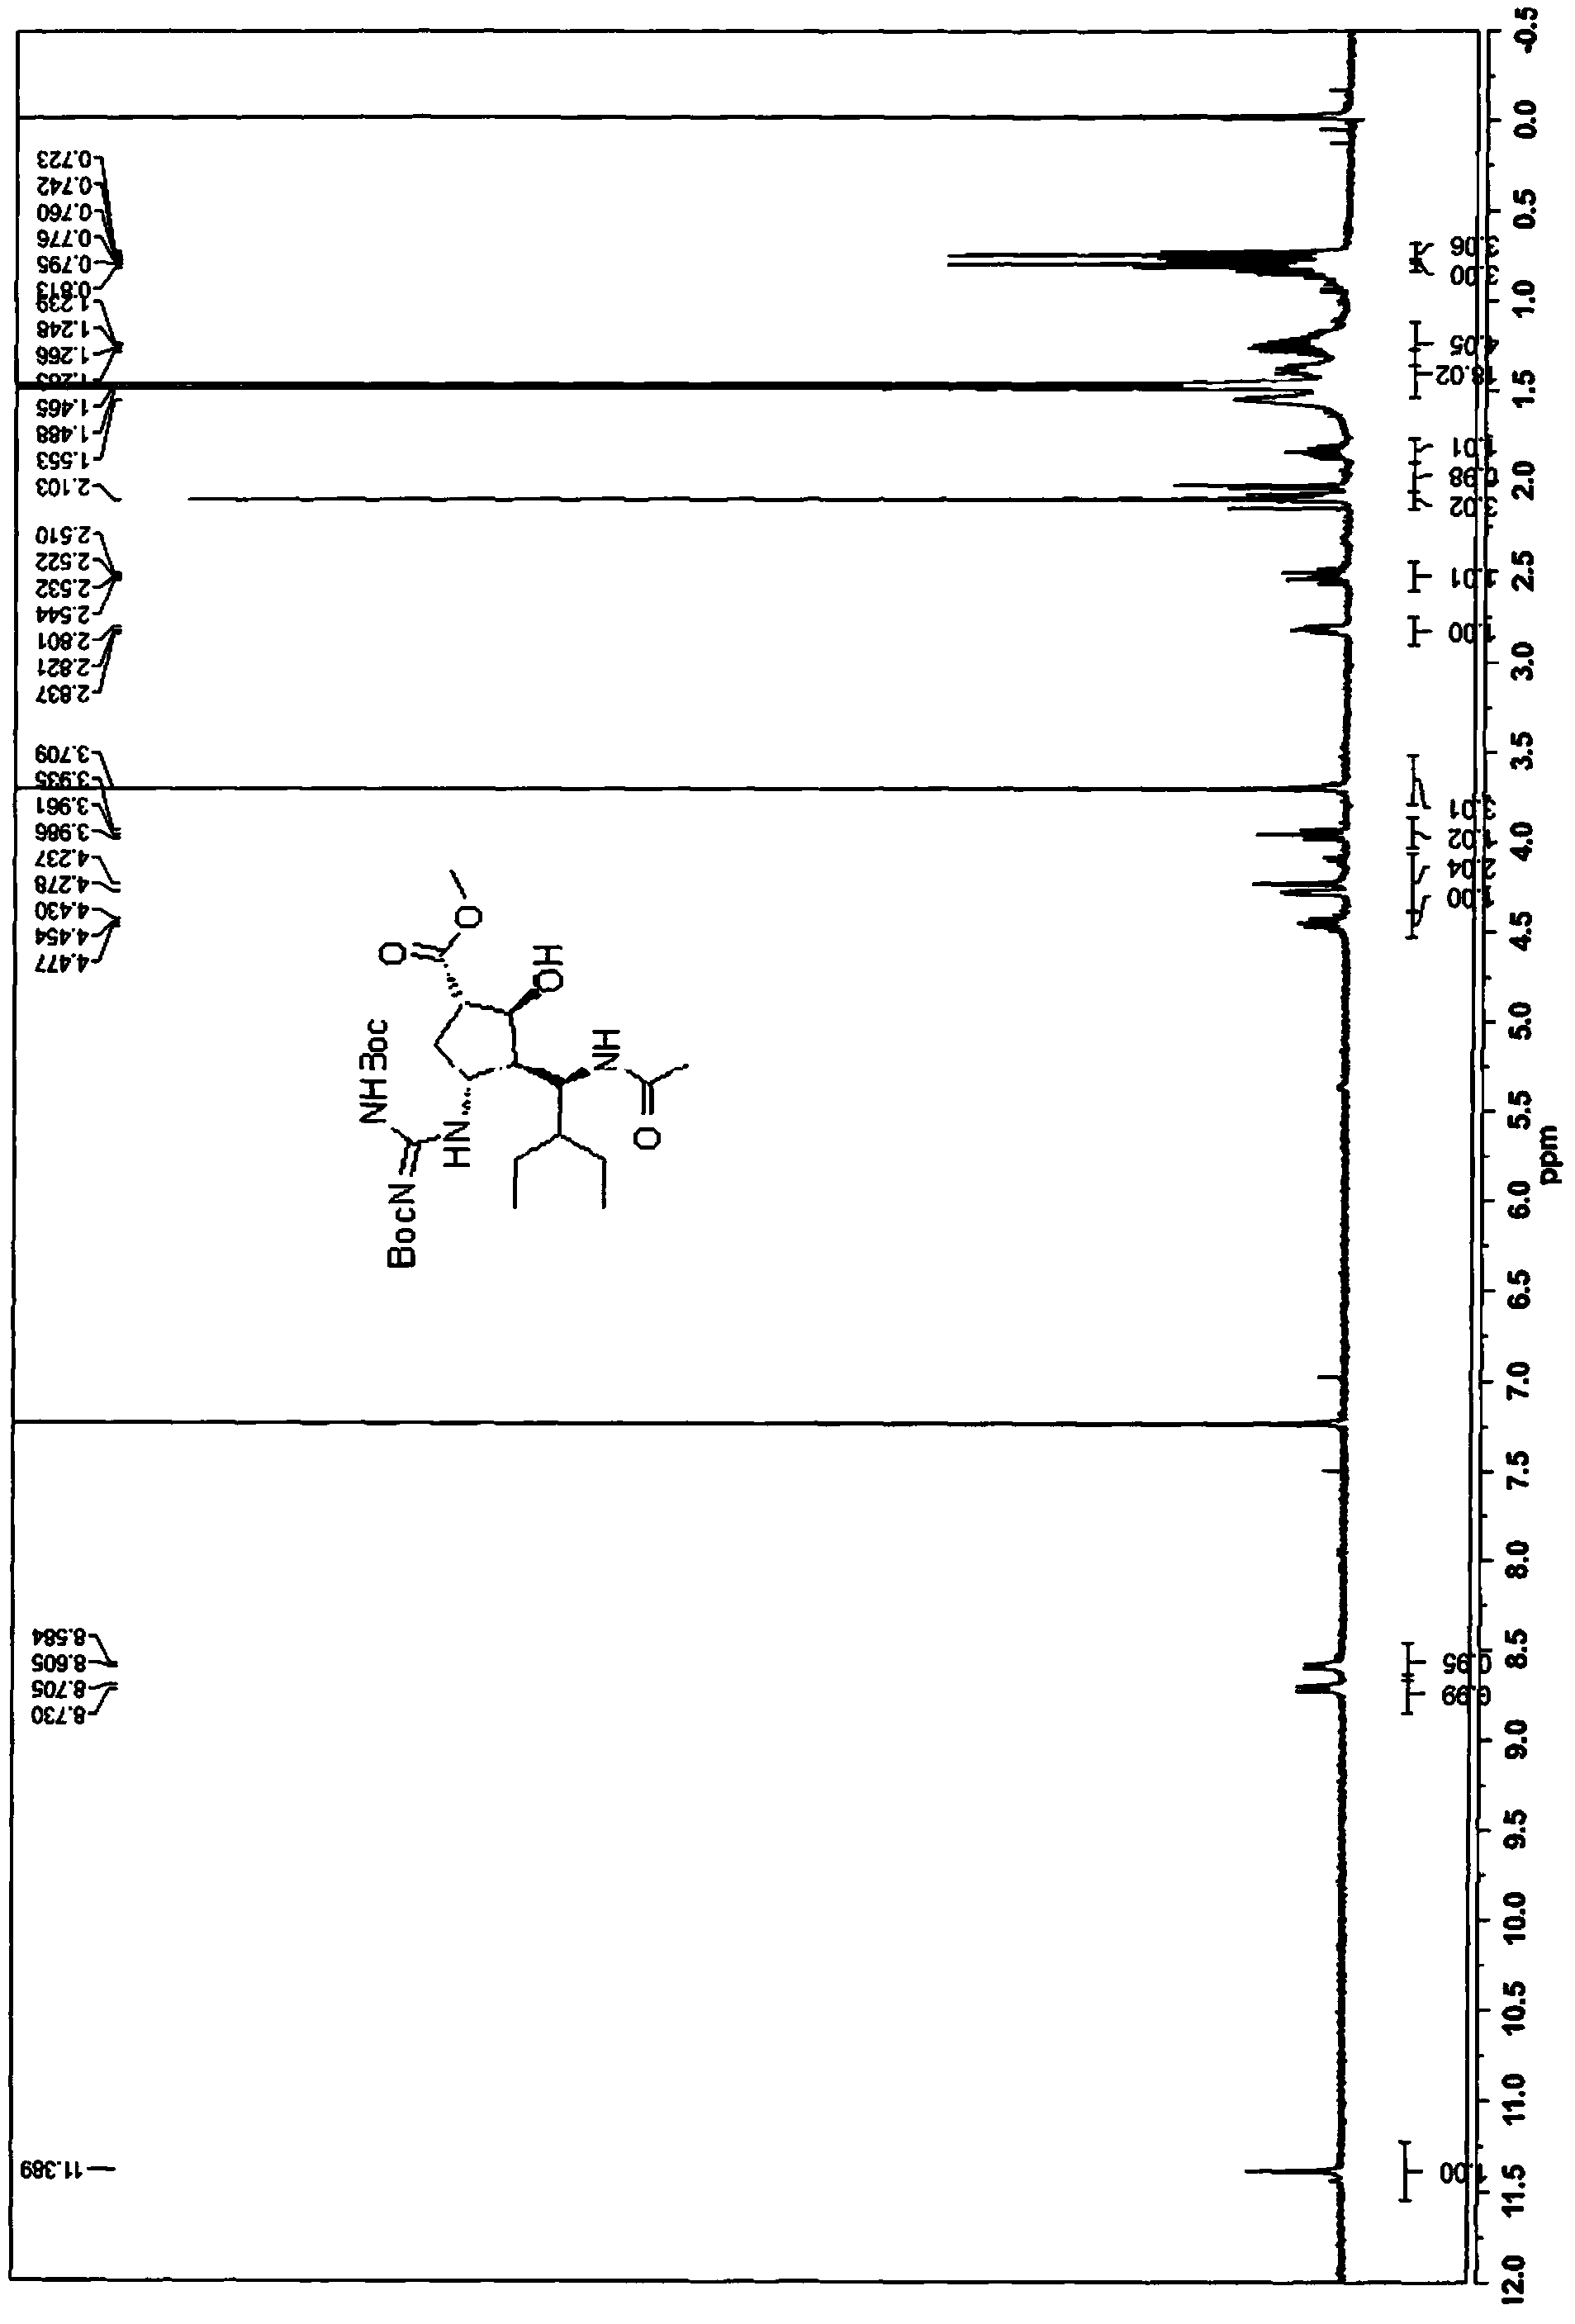 A novel process for the preparation of peramivir and intermediates thereof